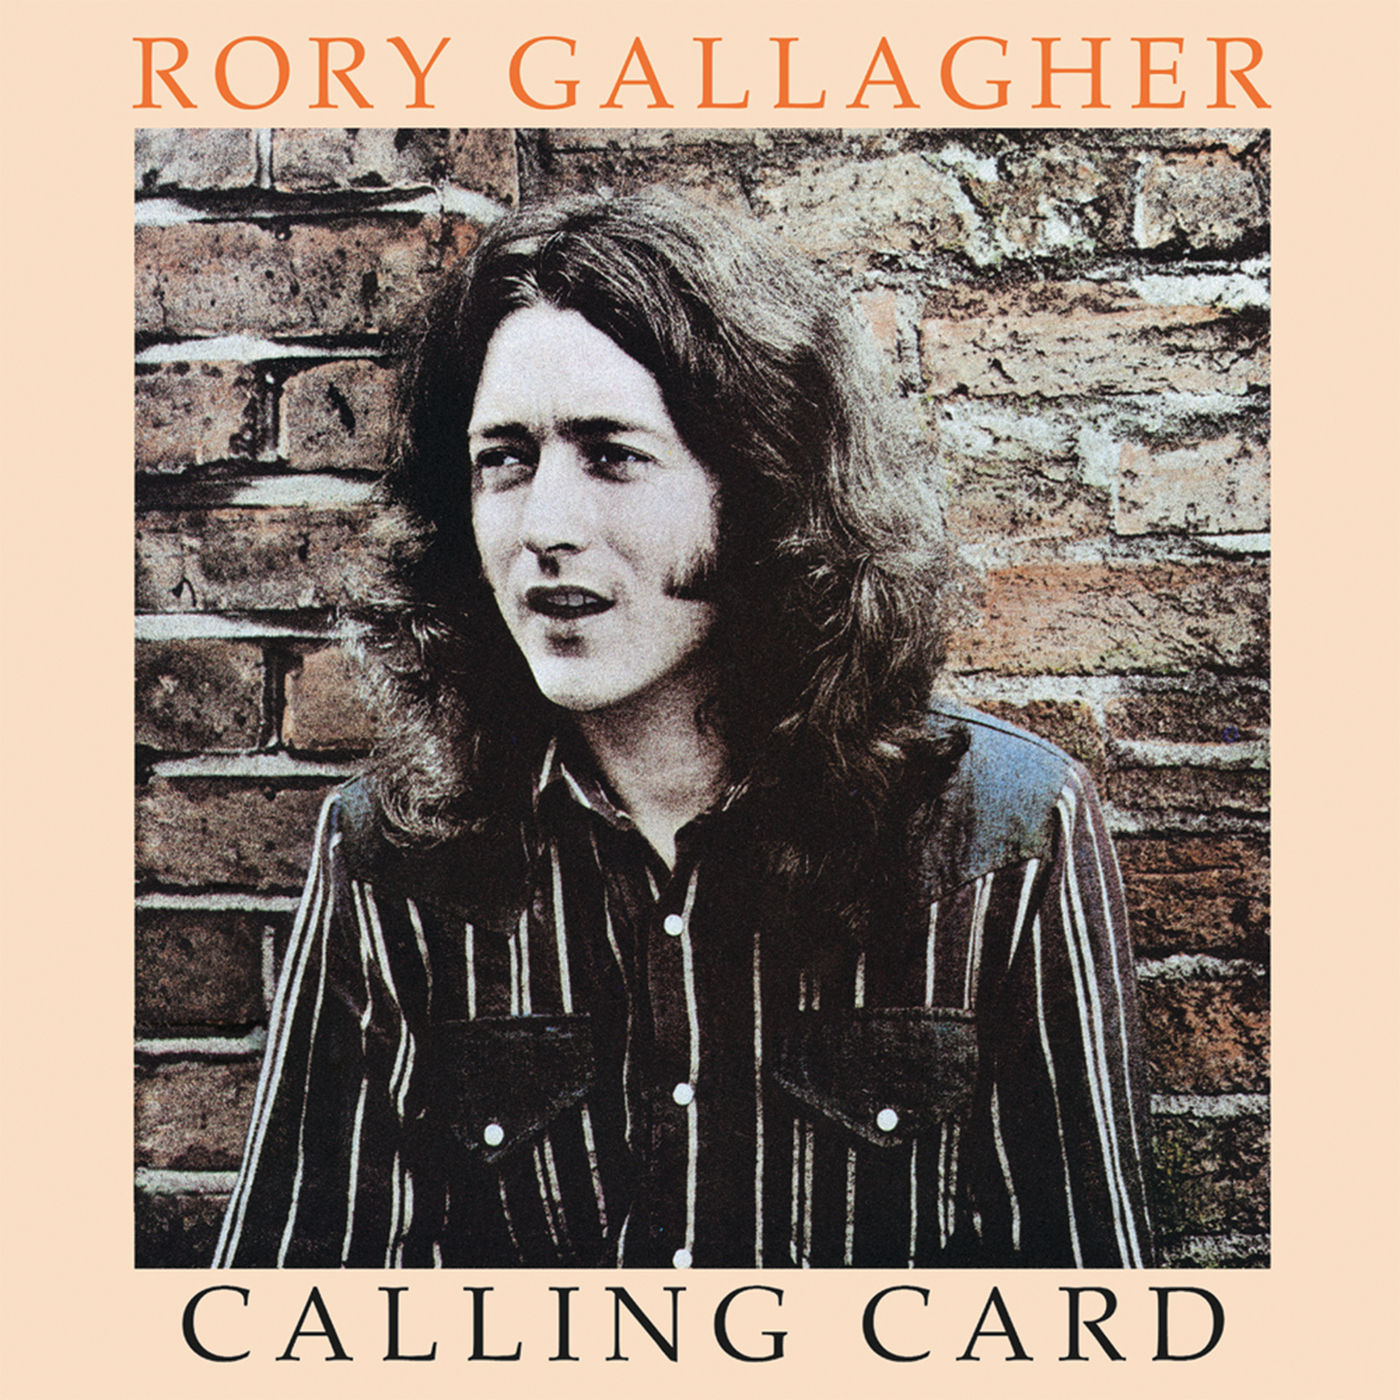 Rory Gallagher - 1976 - Calling Card [2017 HDtracks]